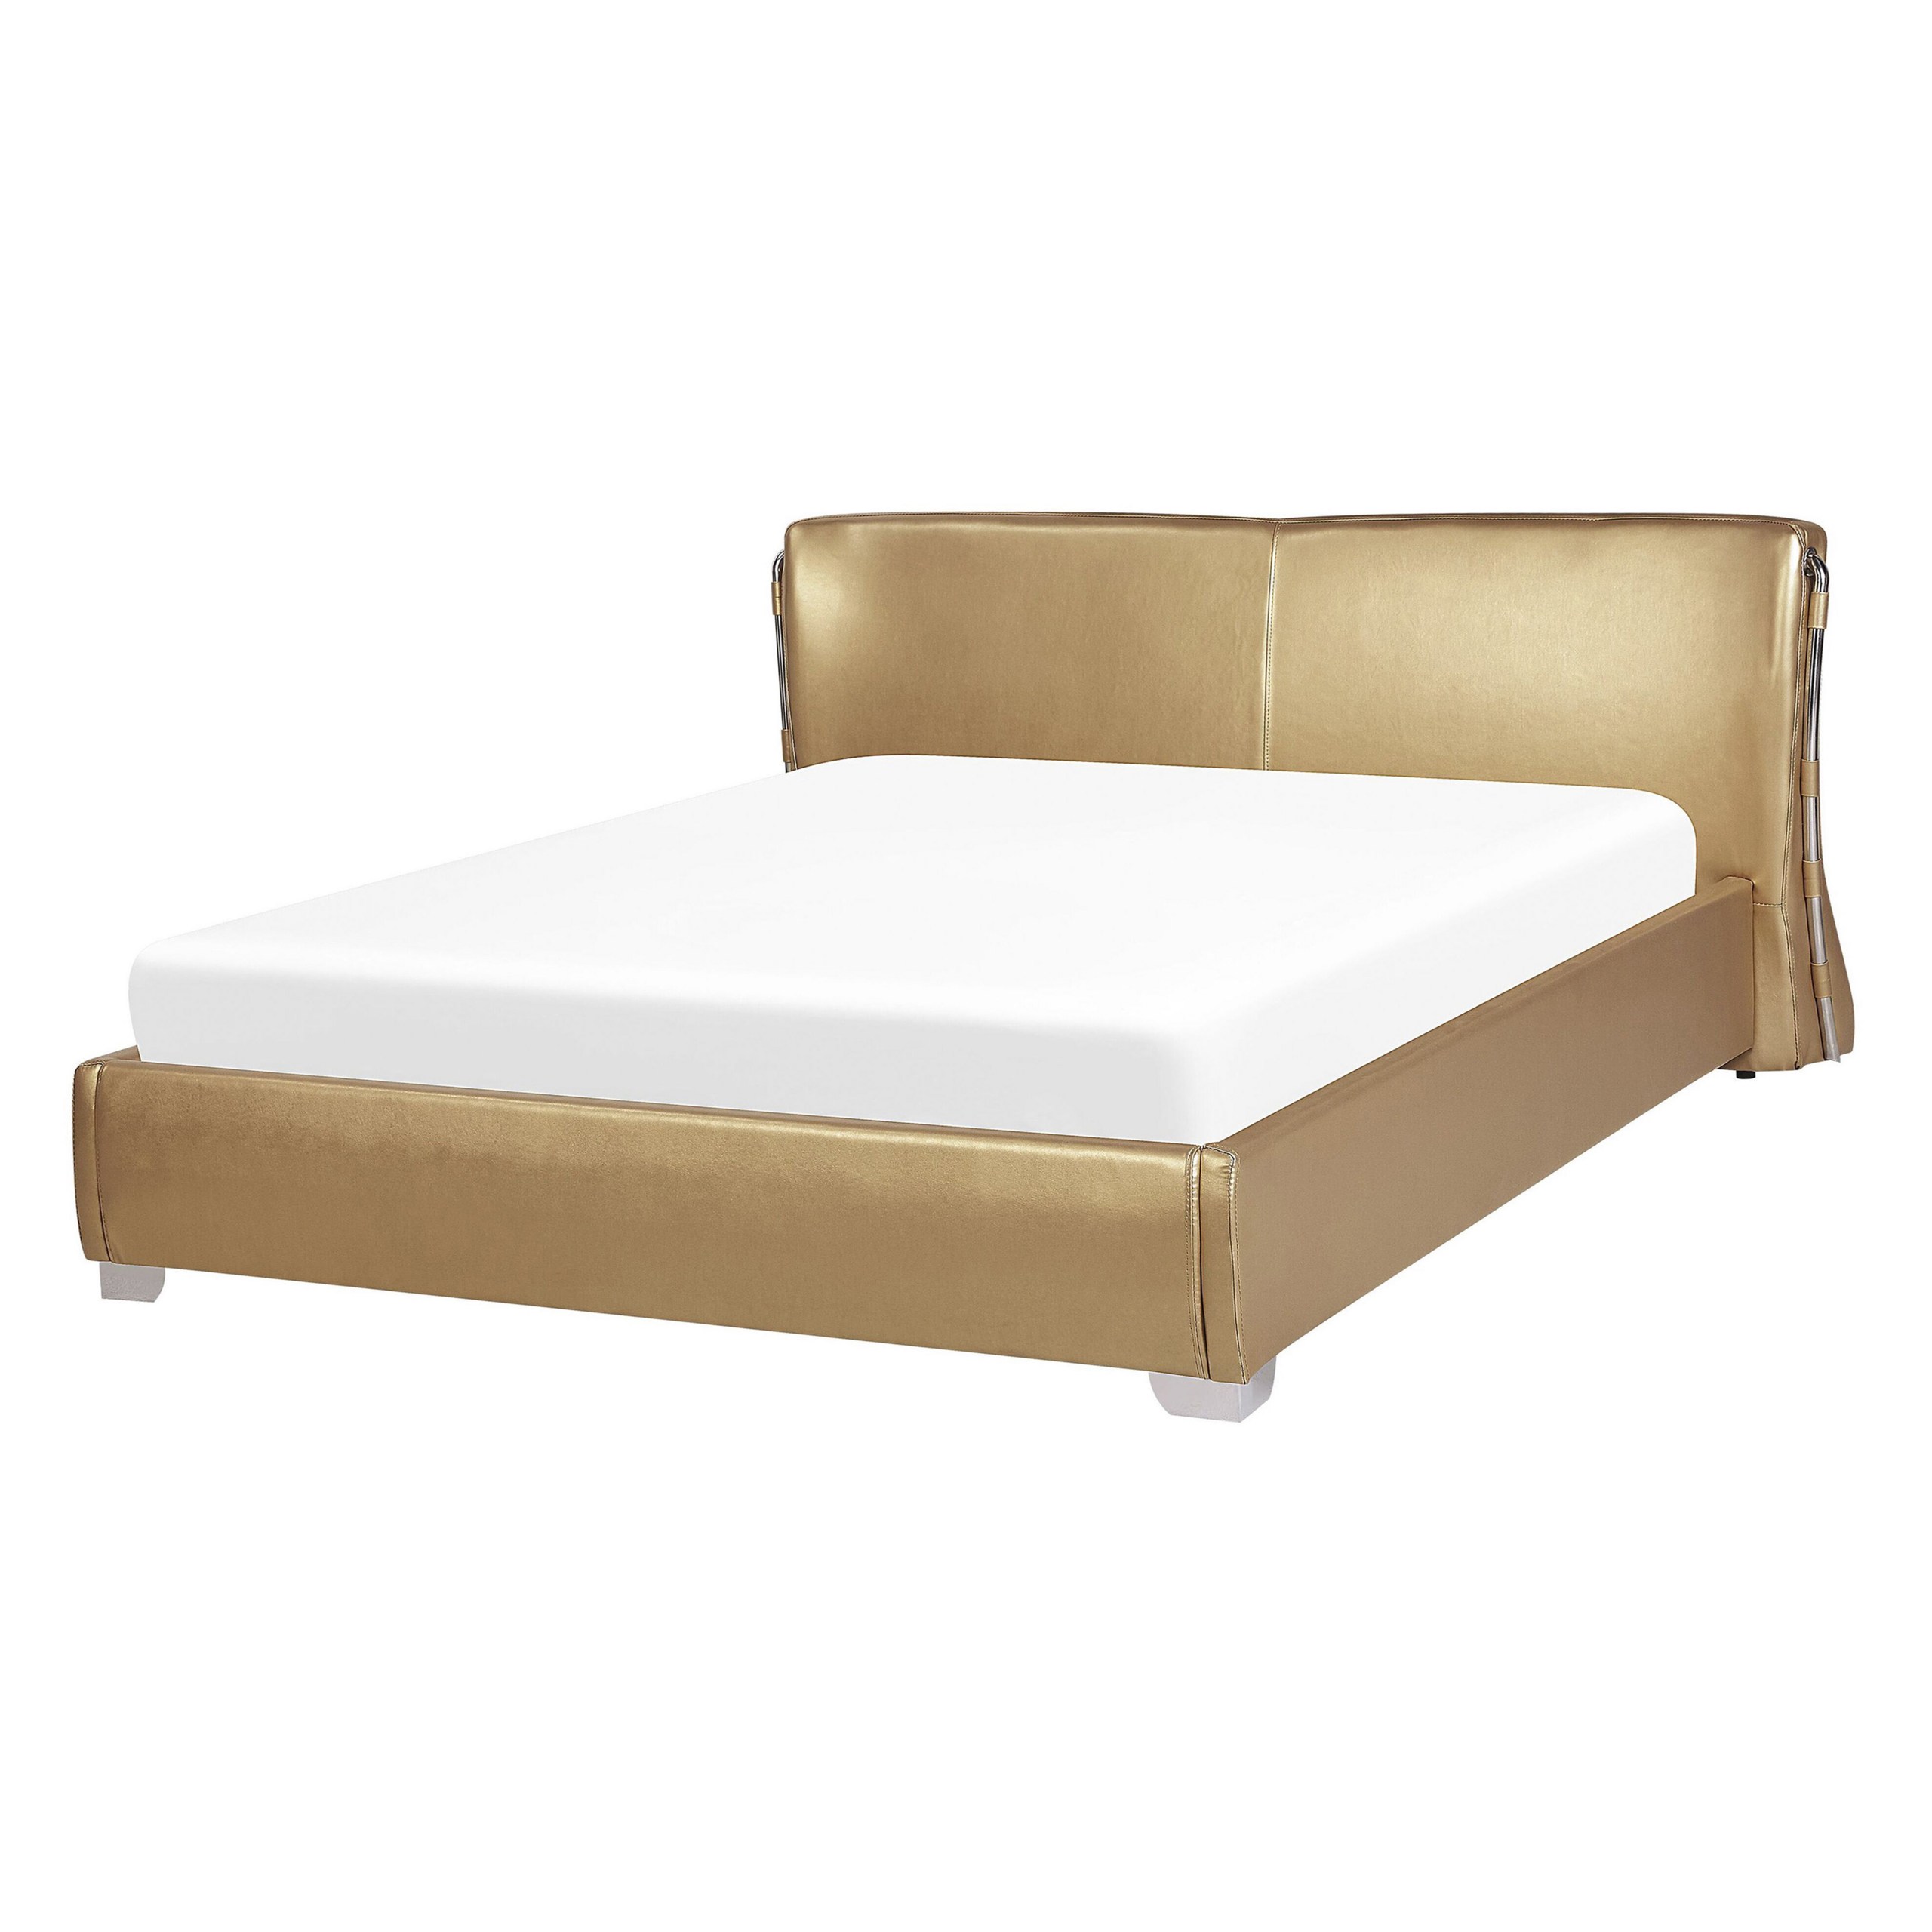 Beliani EU Double Size Panel Bed 4ft6 Gold Leather Slatted Frame Contemporary